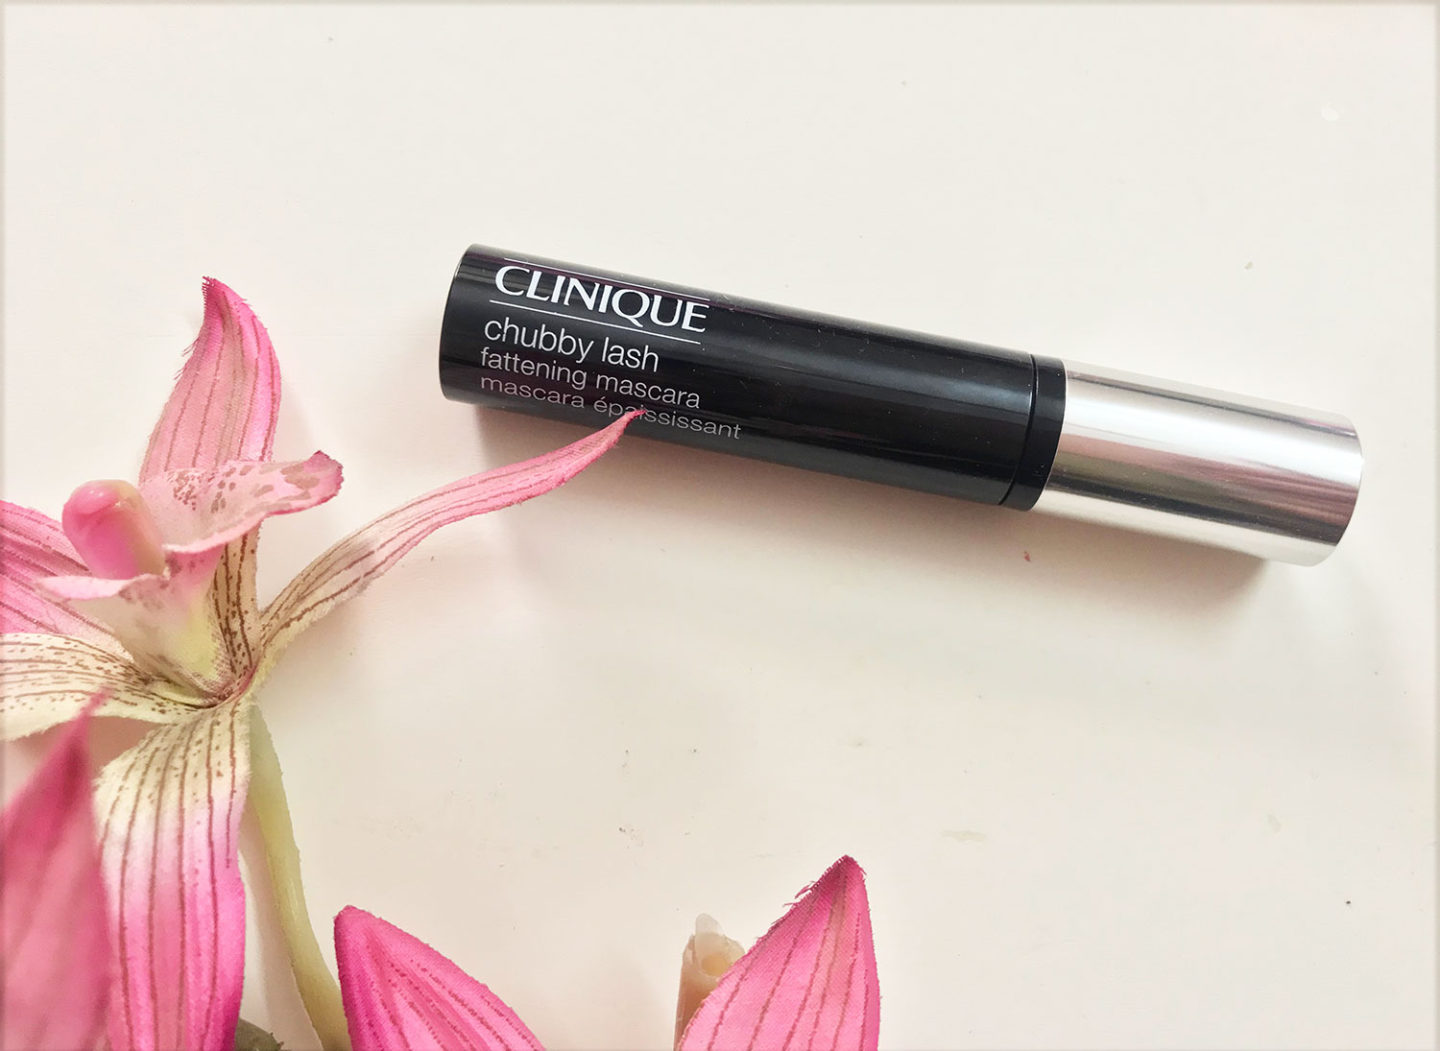 Clinique Chubby Lash Fattening Mascara Review